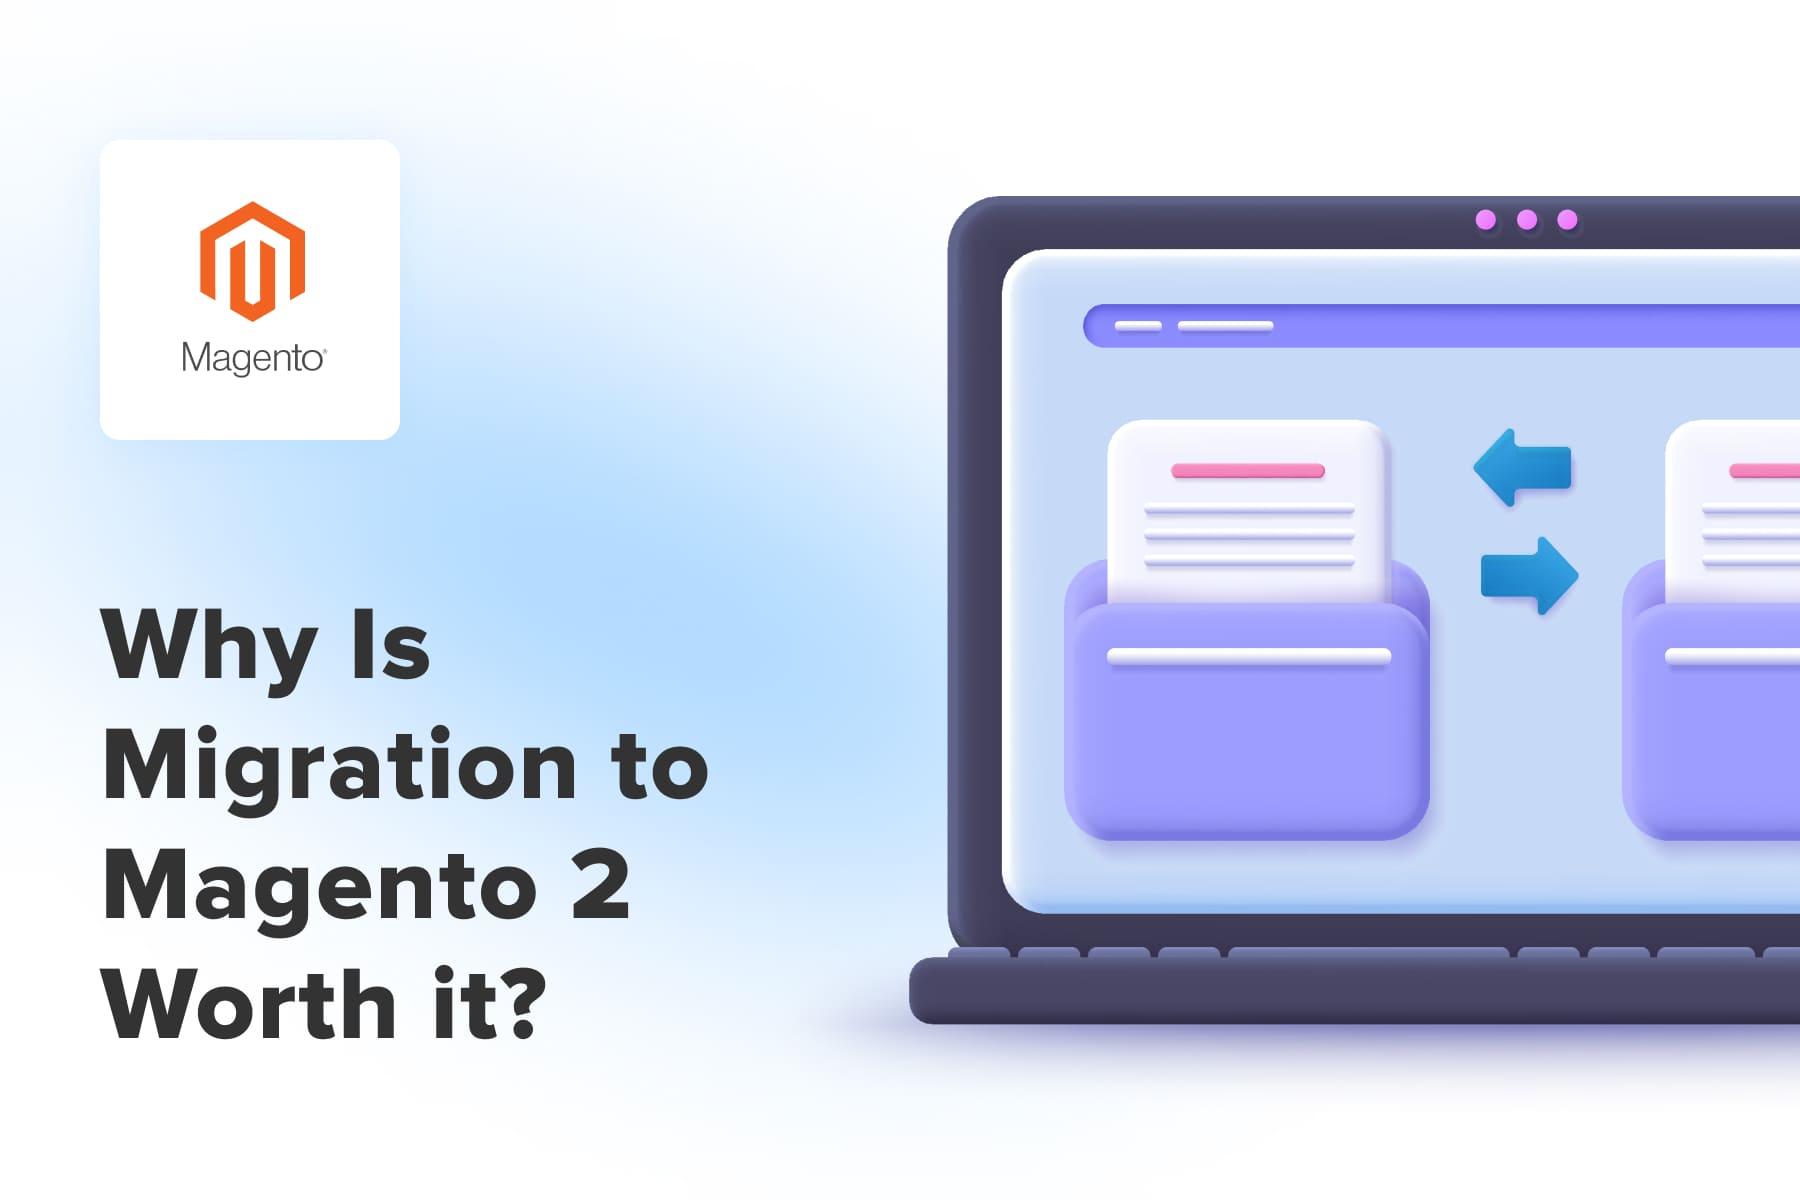 Why Migrate to Magento 2?